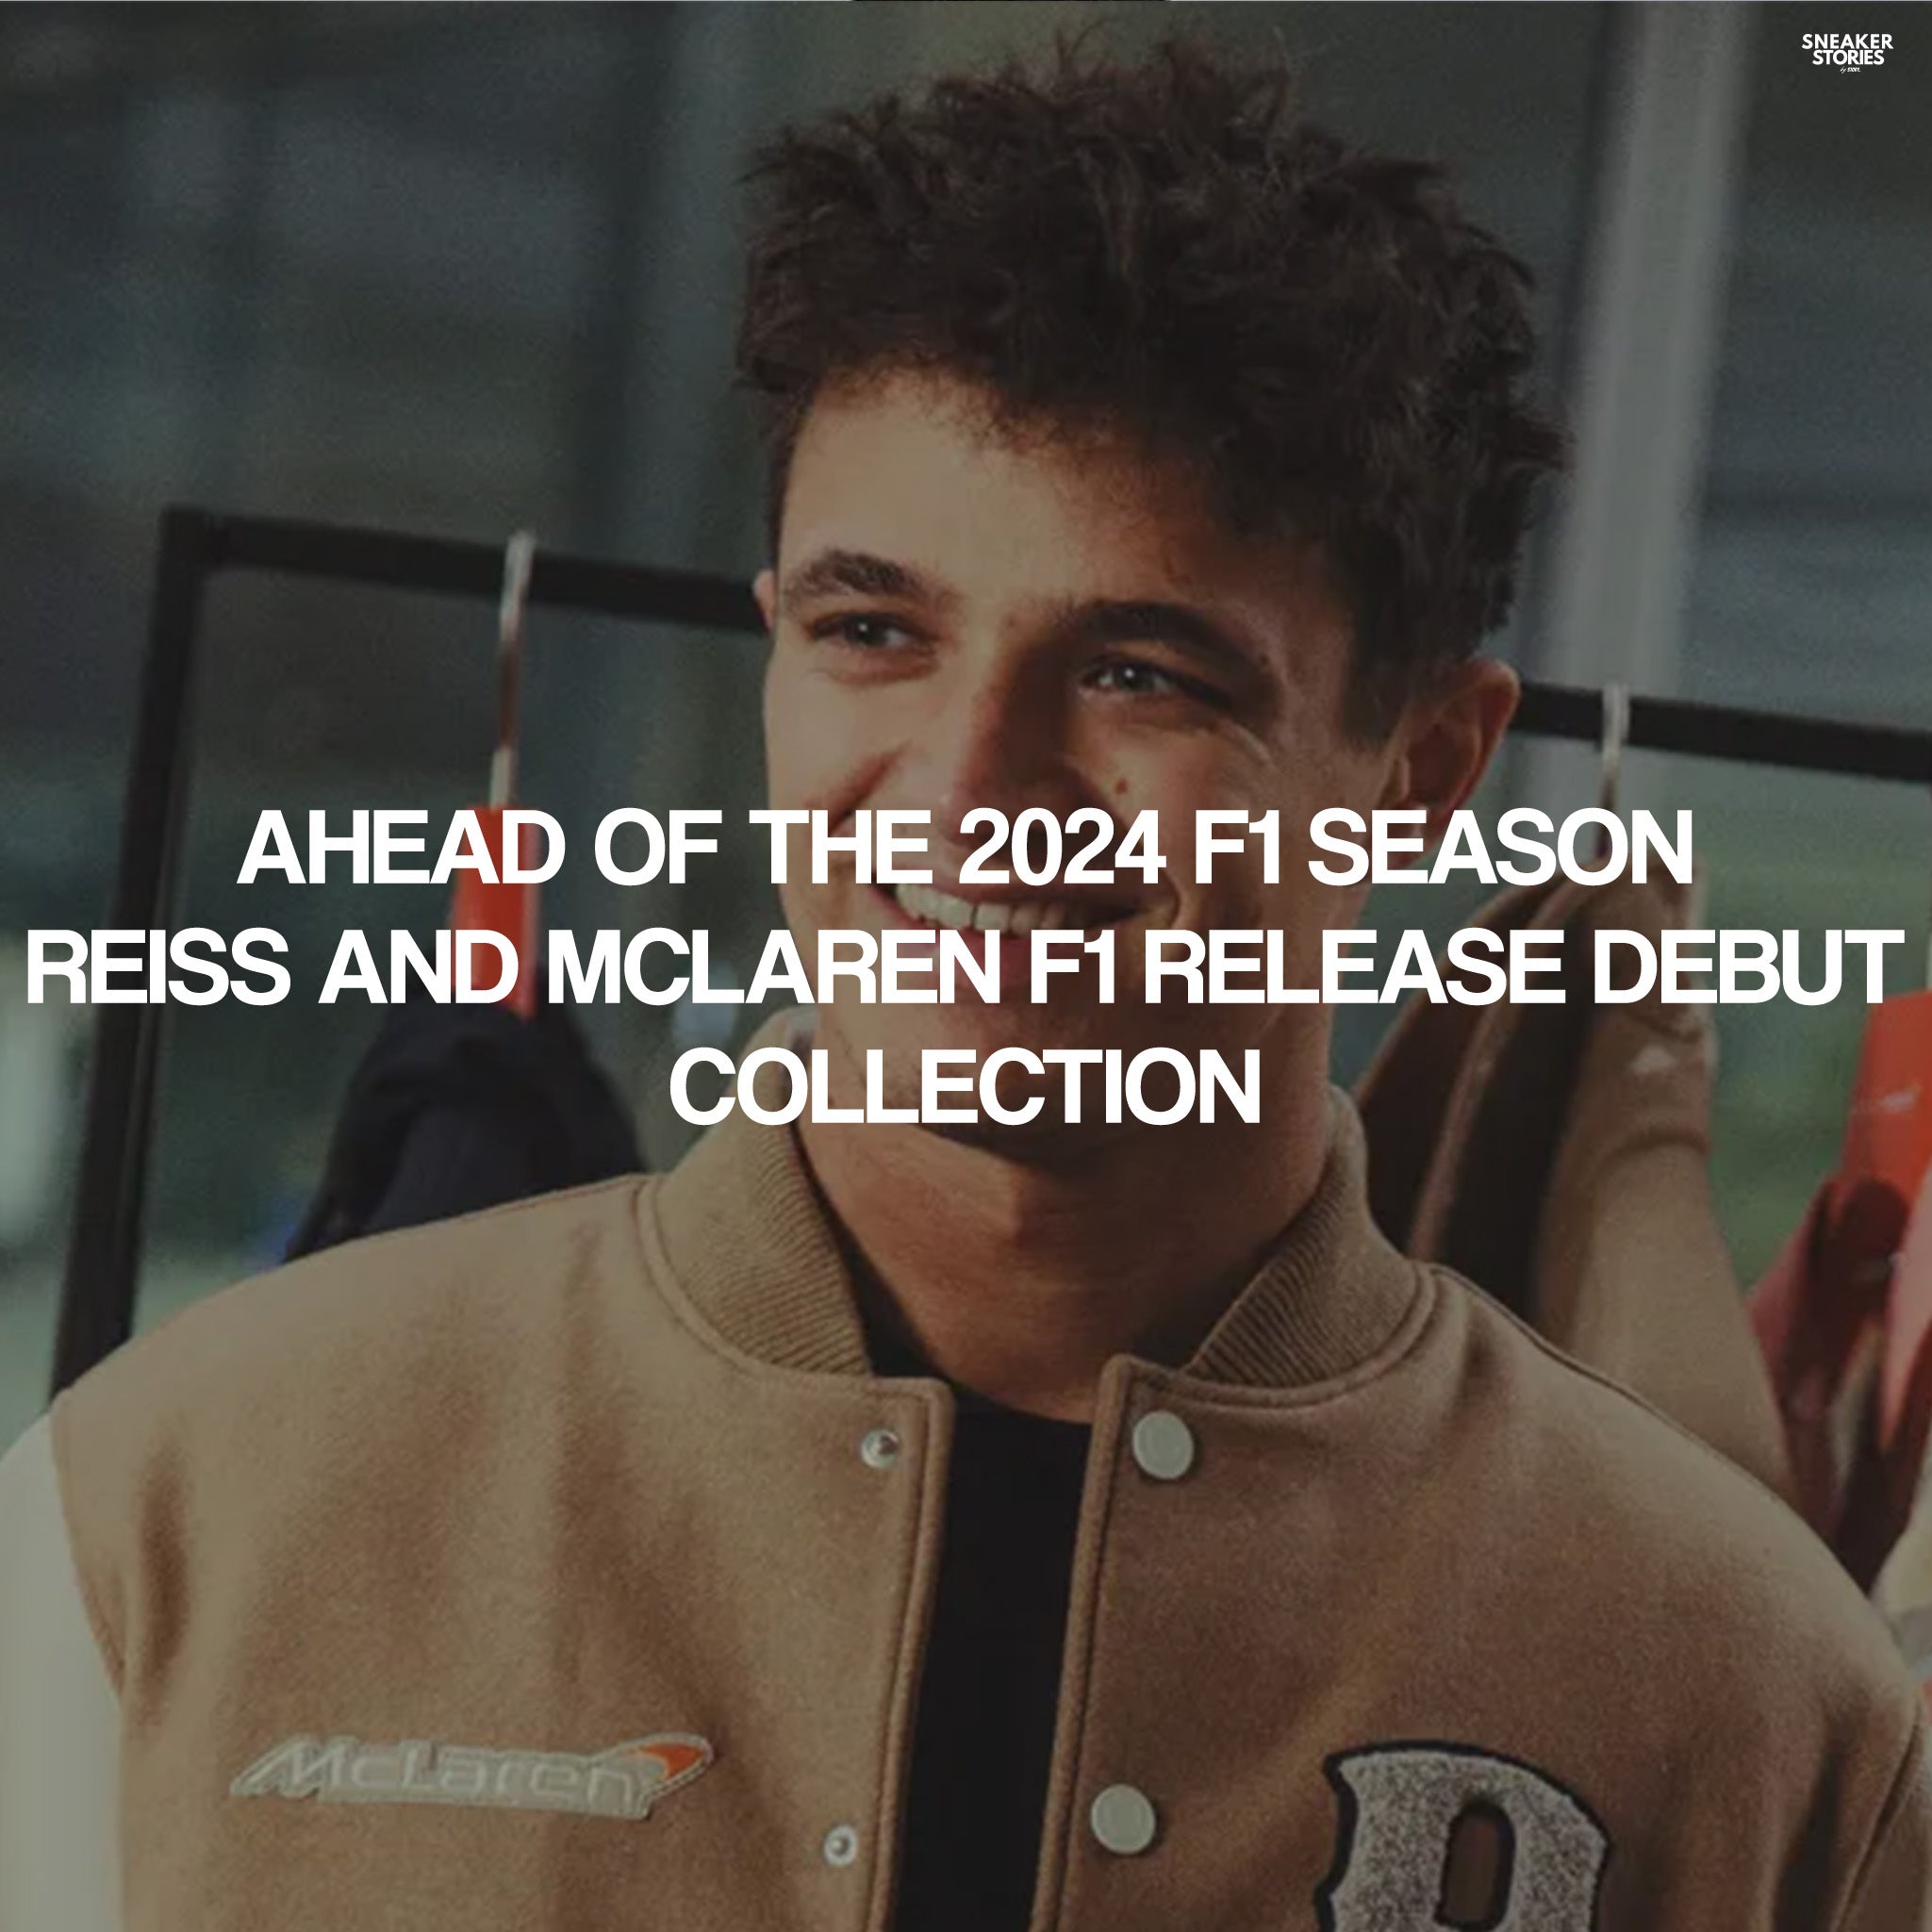 Ahead of the 2024 F1 Season Reiss and Mclaren F1 release debut collection